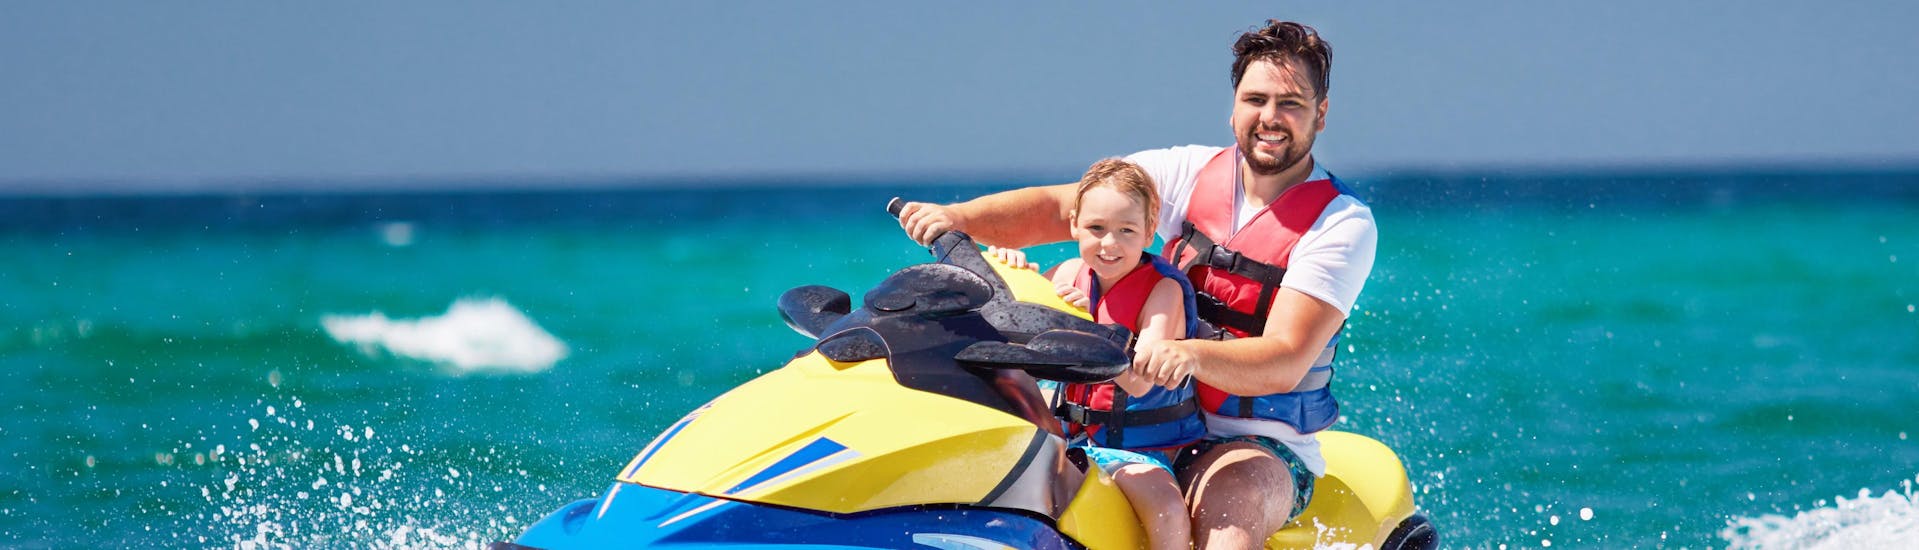 Father and daughter are having fun on a jetski